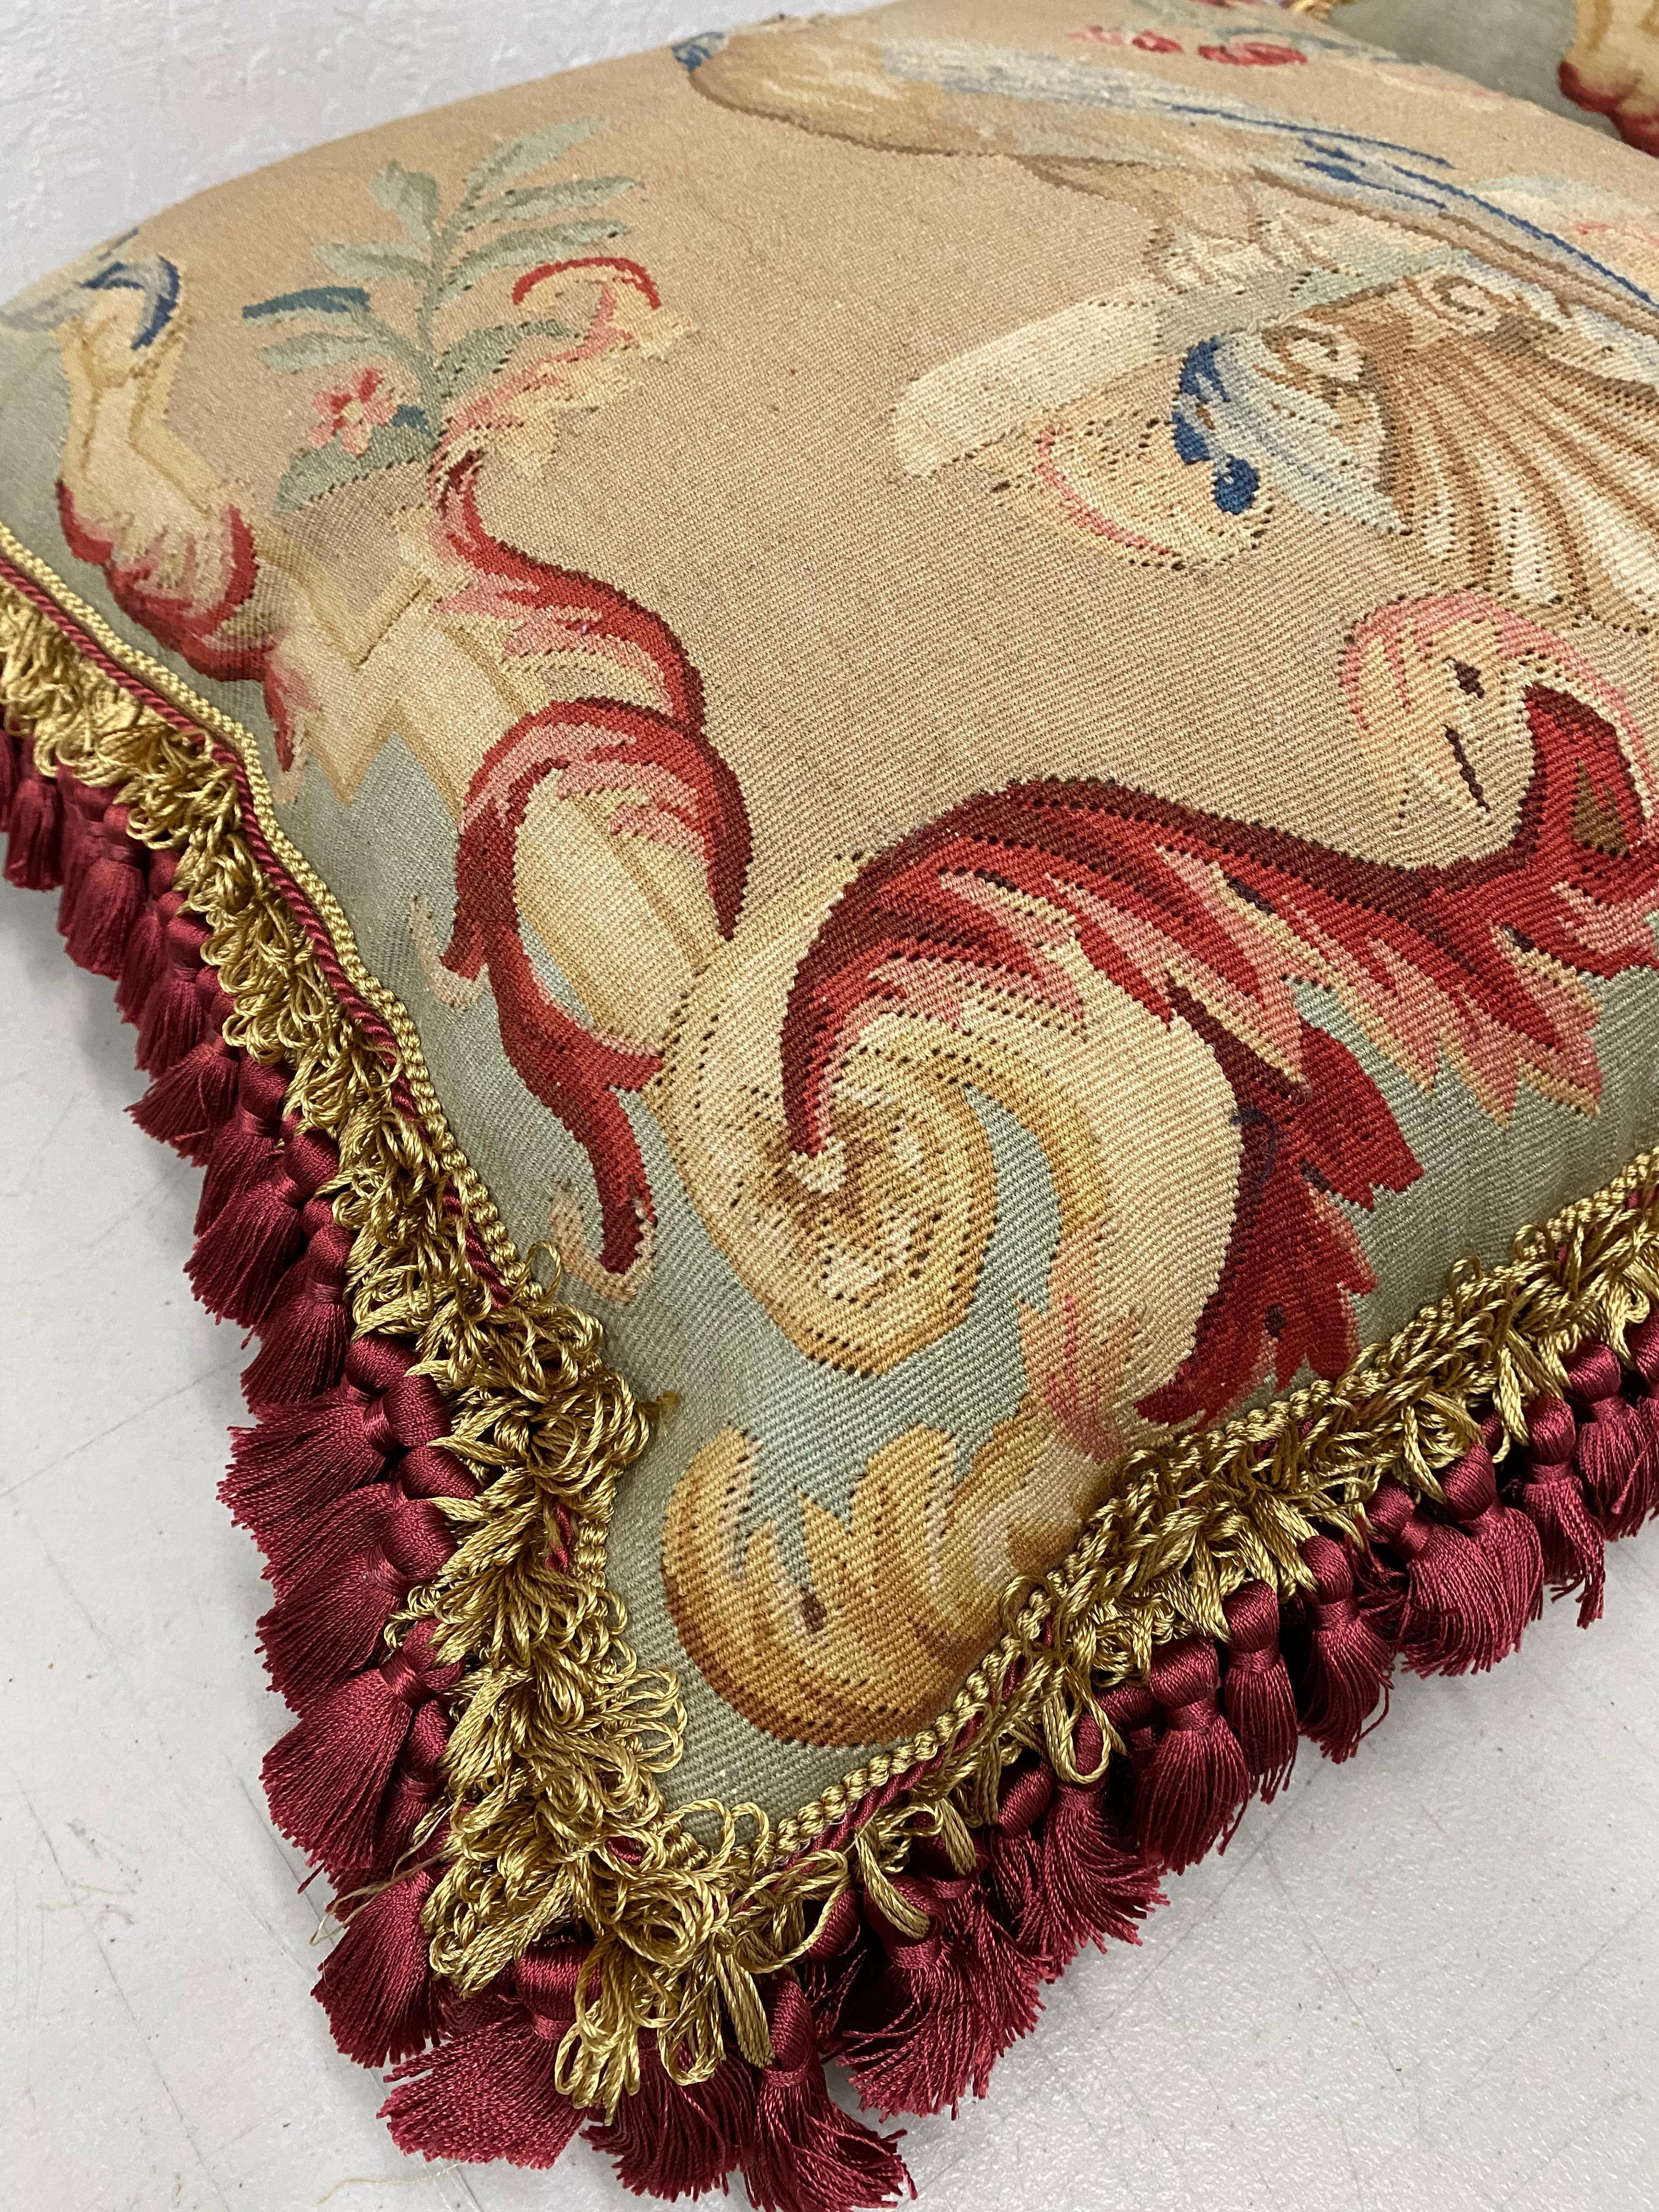 Pair of 19th century Petit point over mid-20th century pillows 

Gorgeous marriage of antique petit point with matching birds over mid-20th century pillows with tassels and plush filling.

Each pillow measures 22